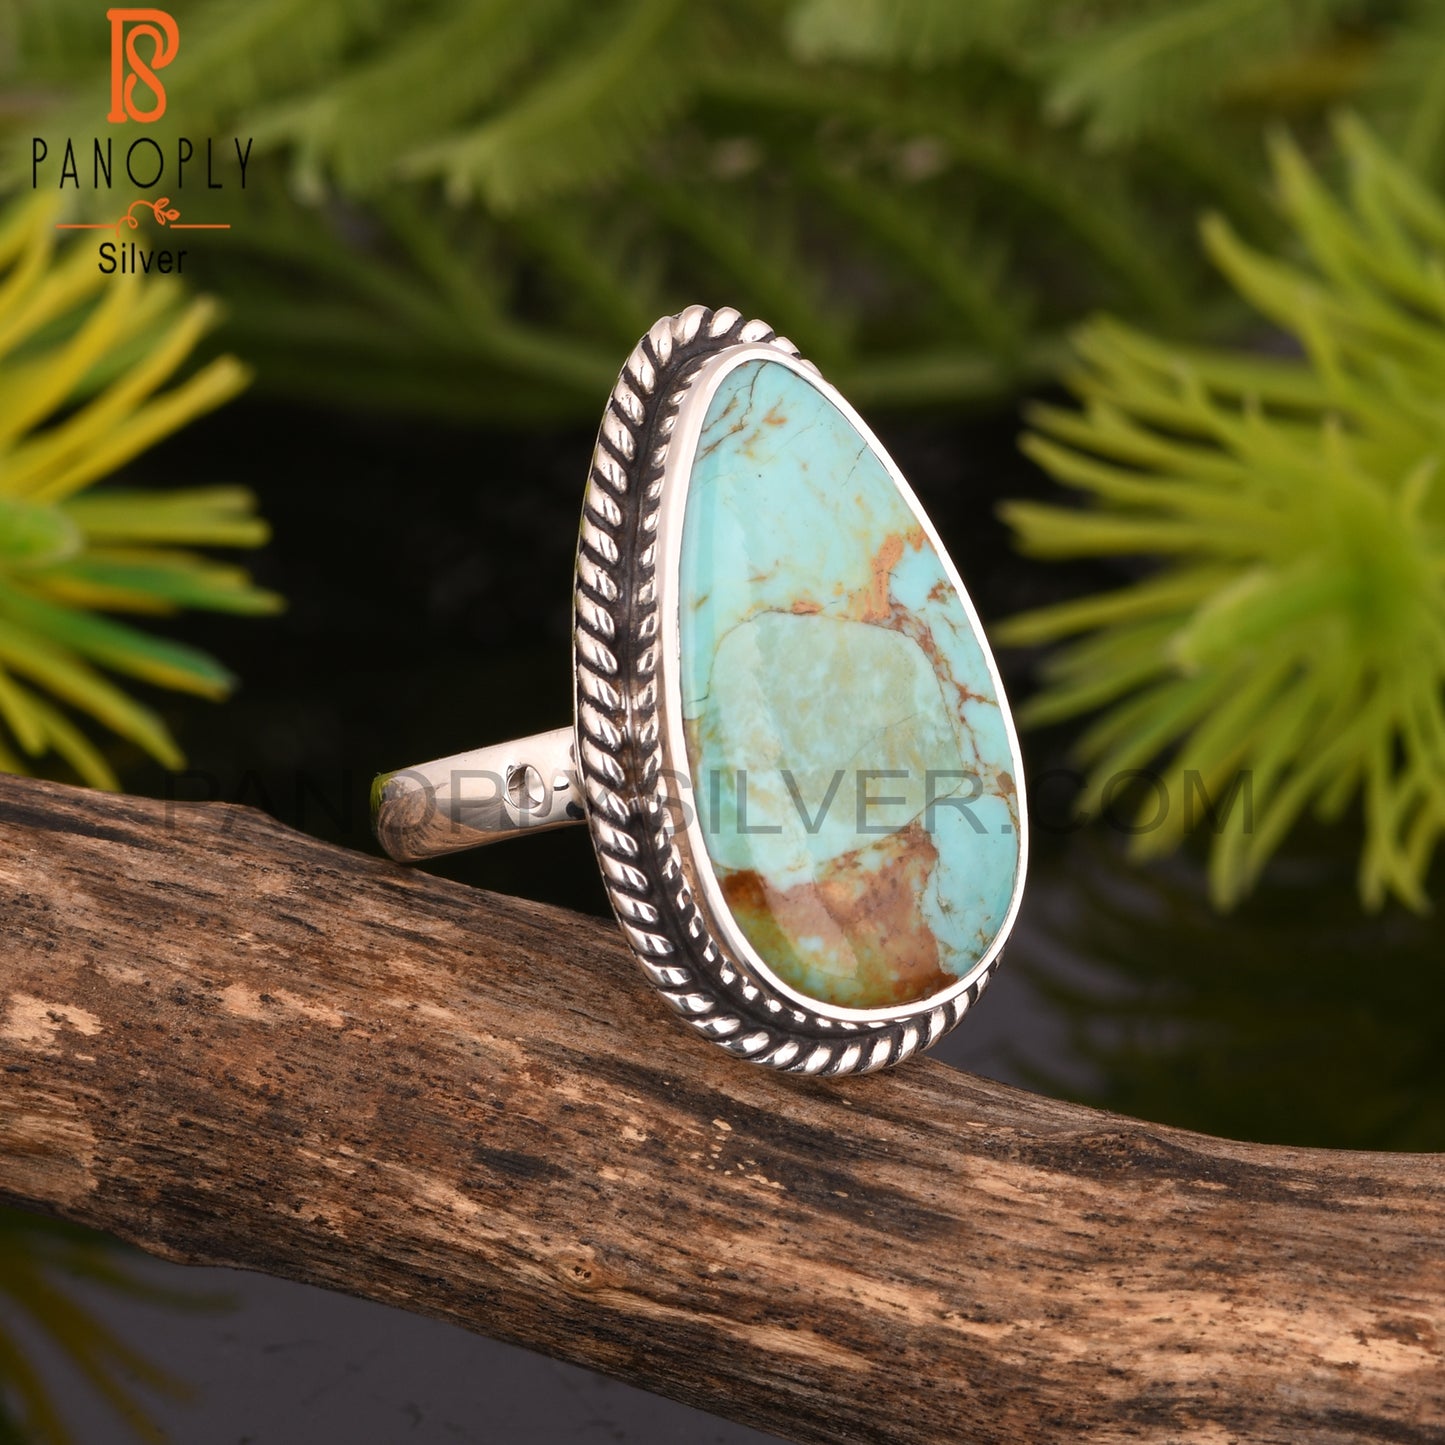 Unique Kingman Turquoise 925 Sterling Silver Ring